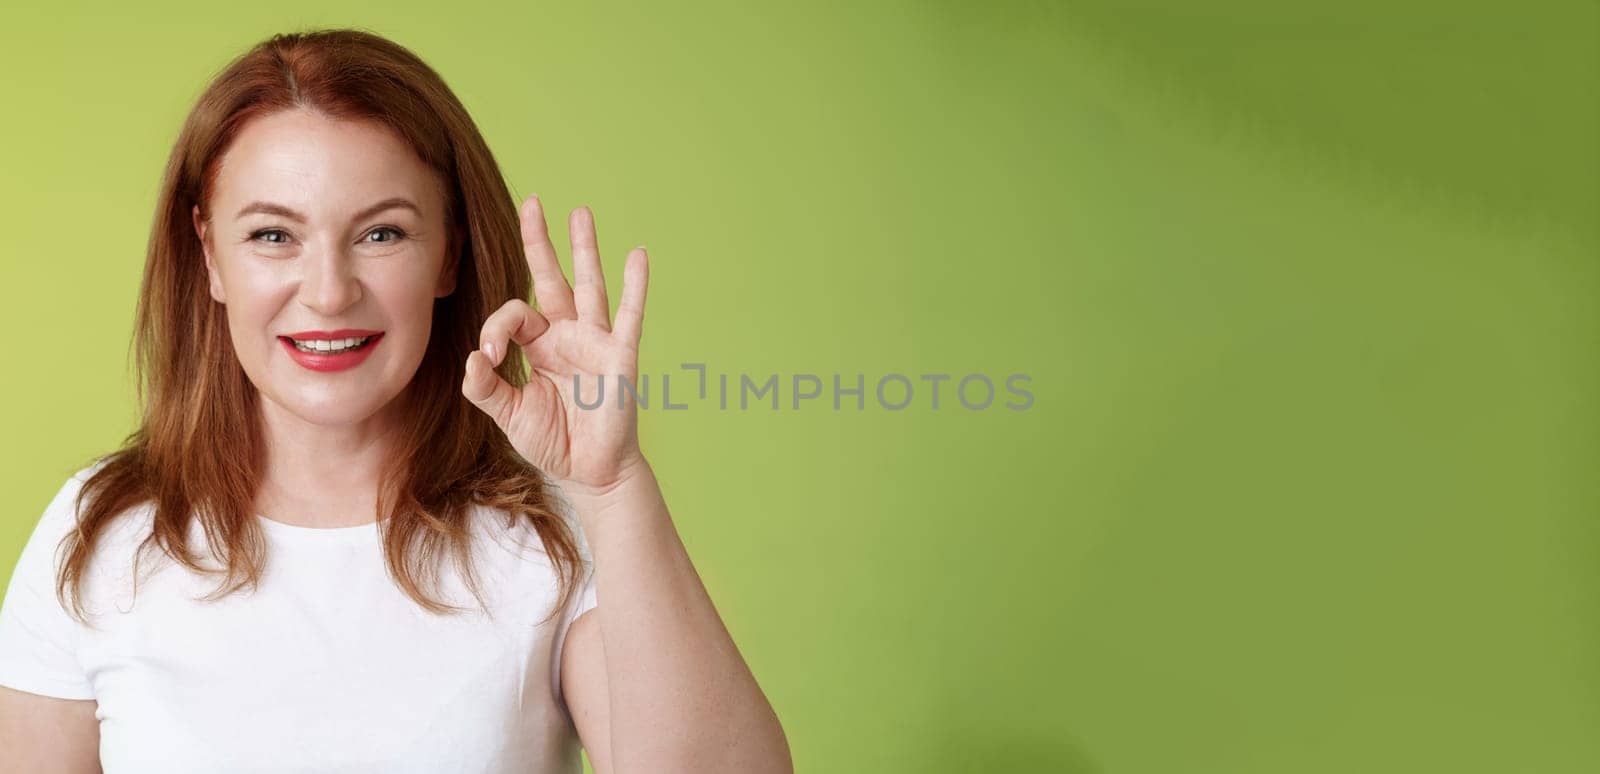 Alright got it. Cheerful motivated determined redhead enthusiastic middle-aged woman show okay ok confirm gesture assured smiling satisfactory gesture give positive like approval green background.